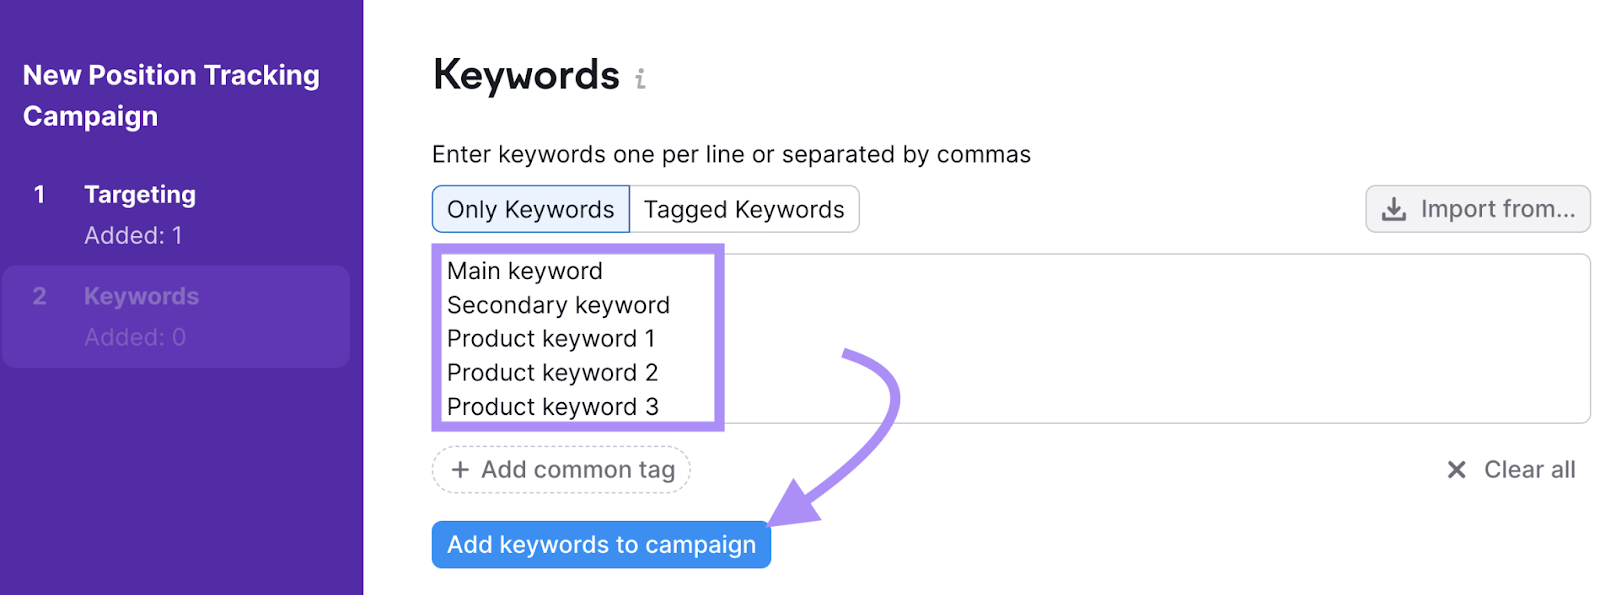 "Keywords" settings window in Position Tracking tool